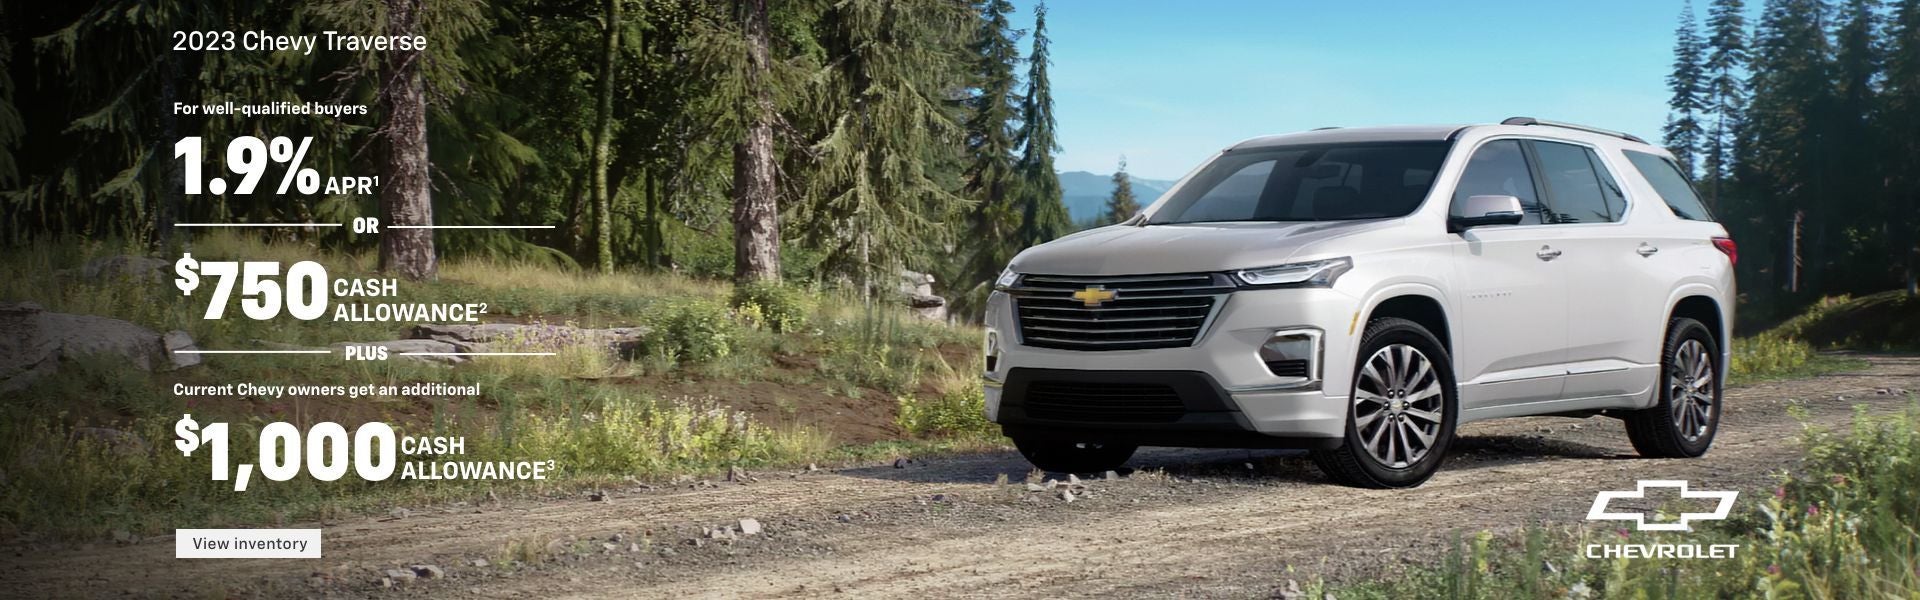 2023 Chevy Traverse. For well-qualified buyers 1.9% APR. Or, $750 cash allowance. Plus, current C...